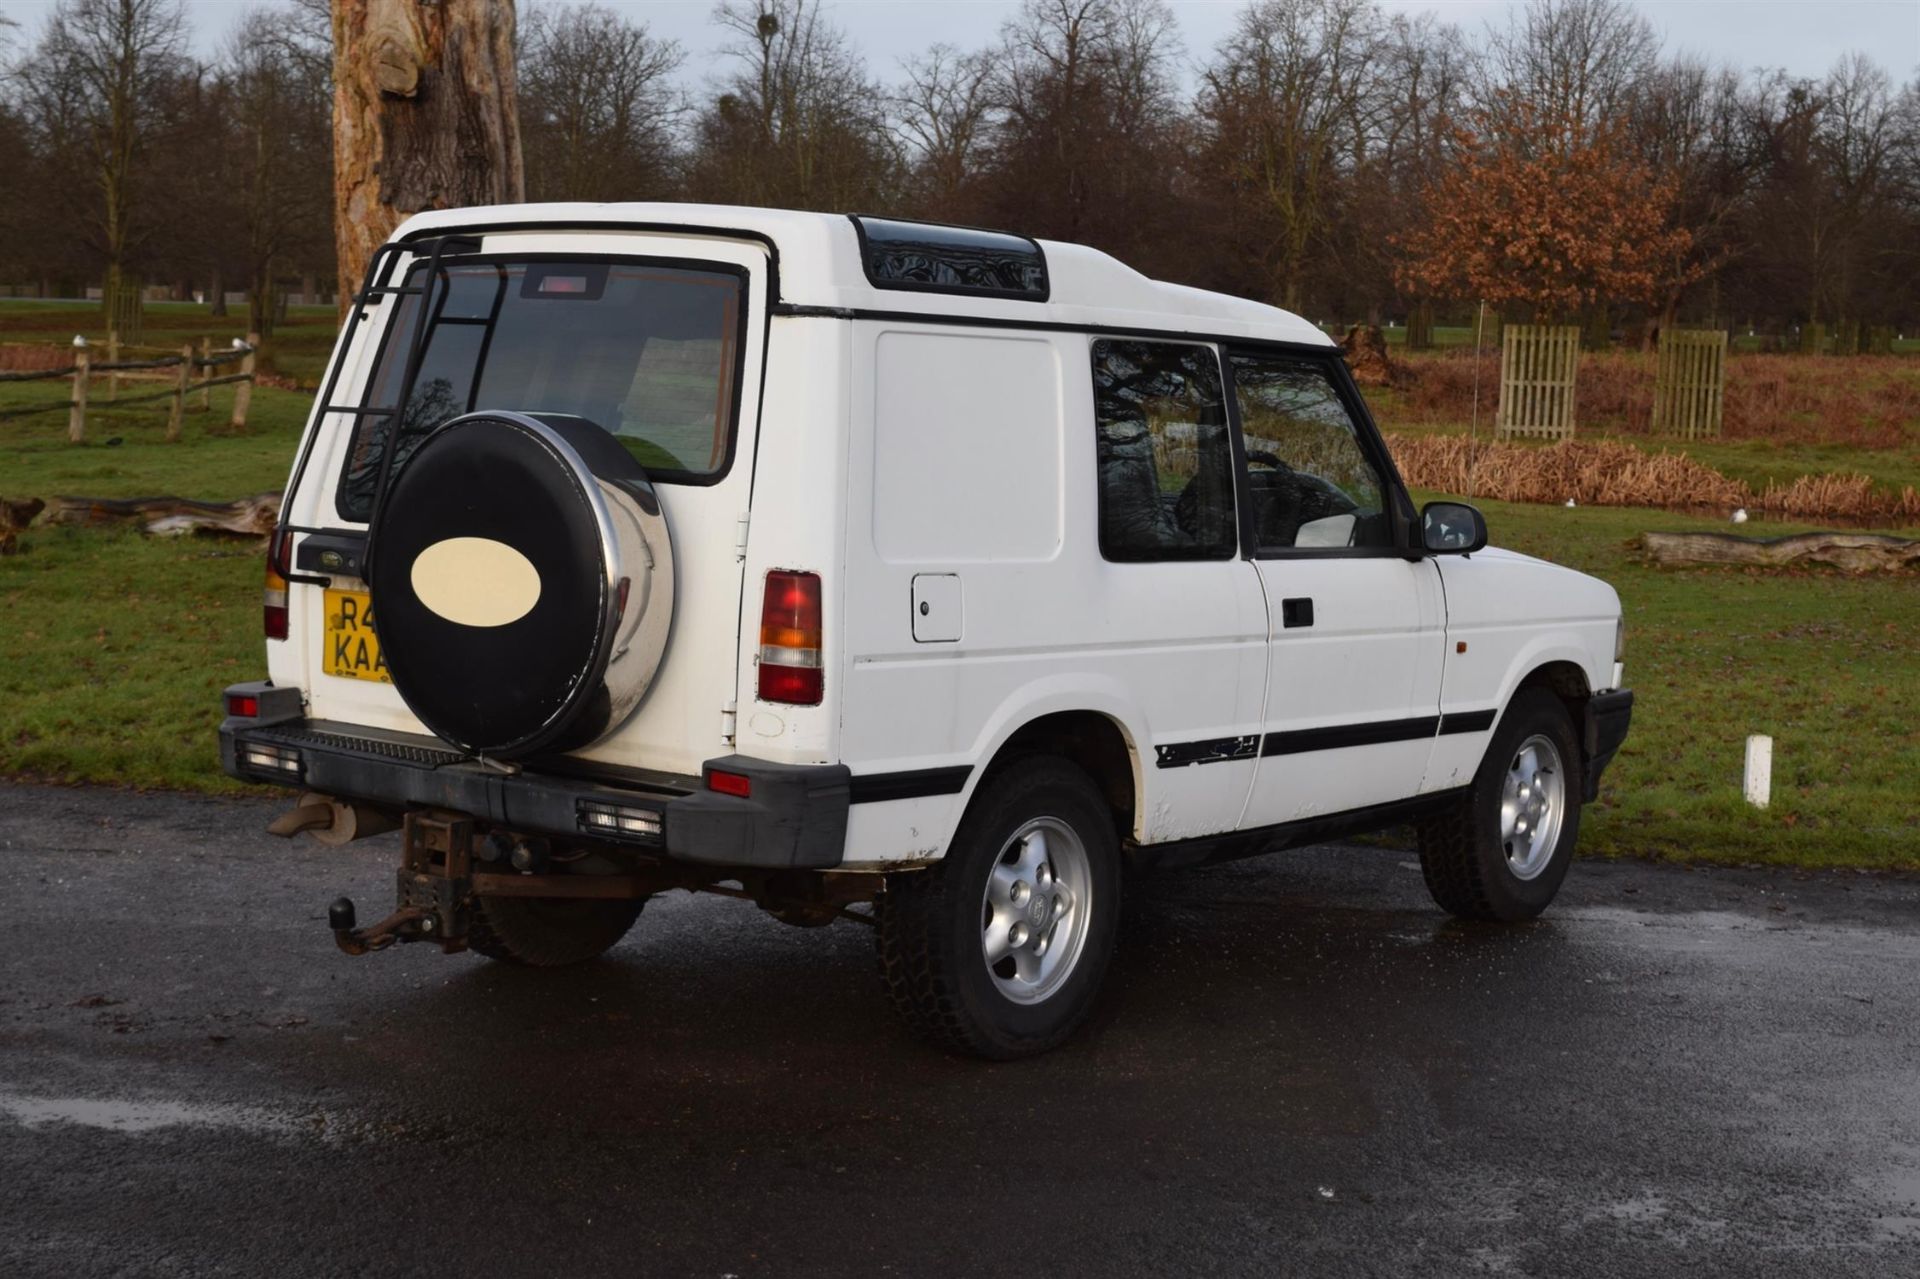 1998 Land Rover Discovery 2-Door R41 KAA. 2-door Land Rover Discovery 300 TDI, which was first - Image 10 of 41